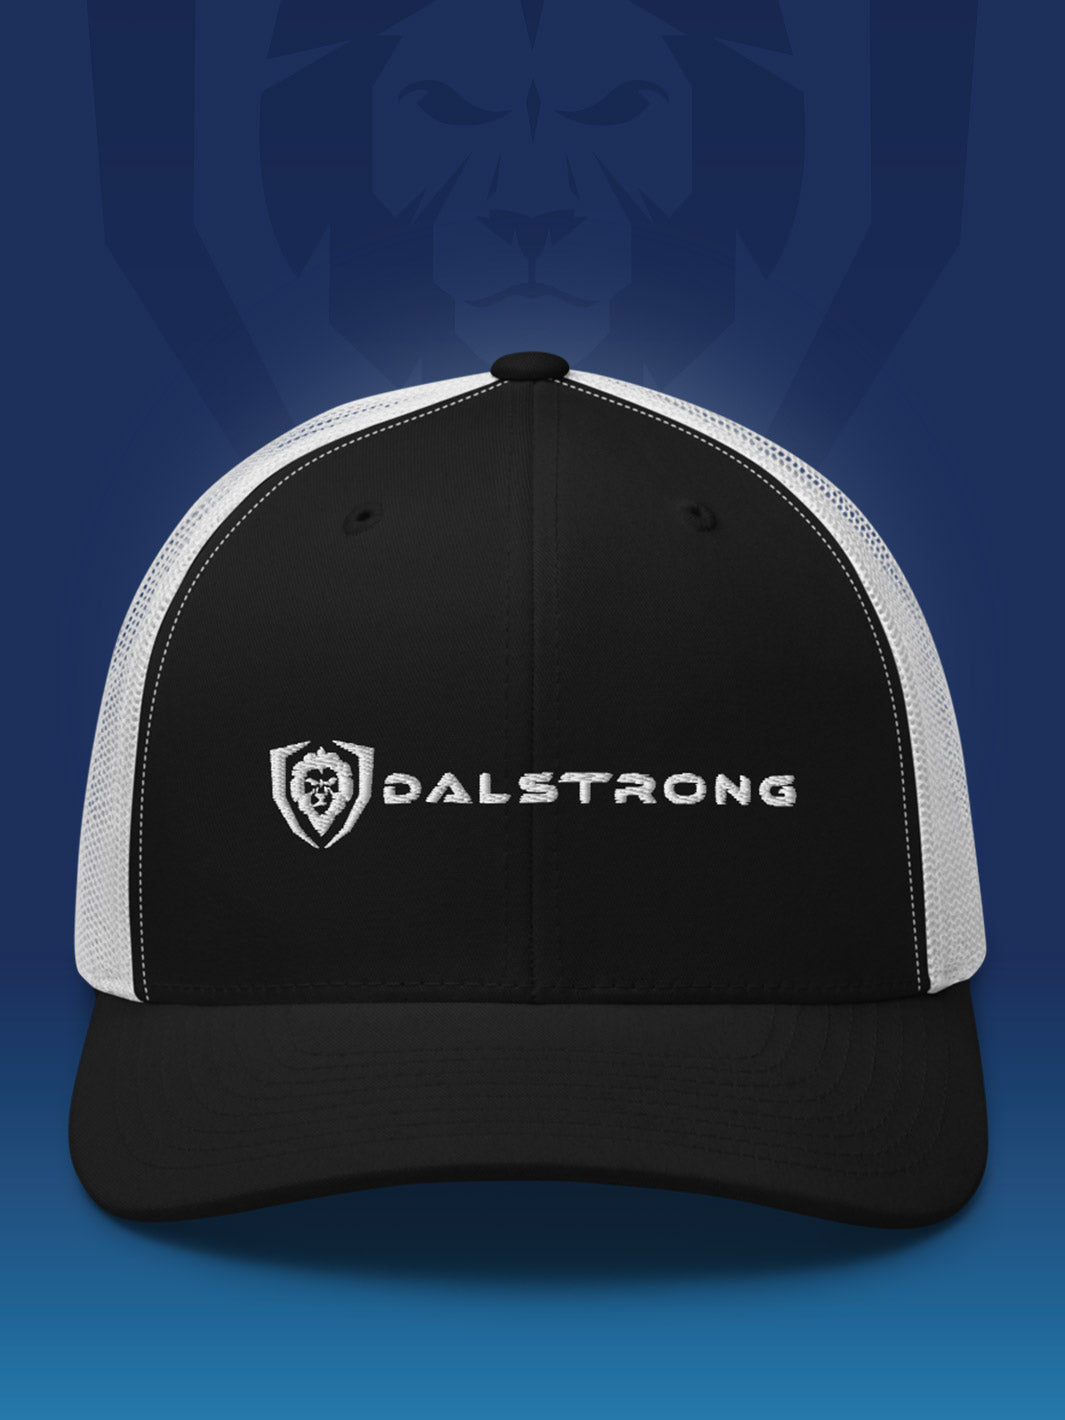 Dalstrong apparel trucker cap classic logo black and white.